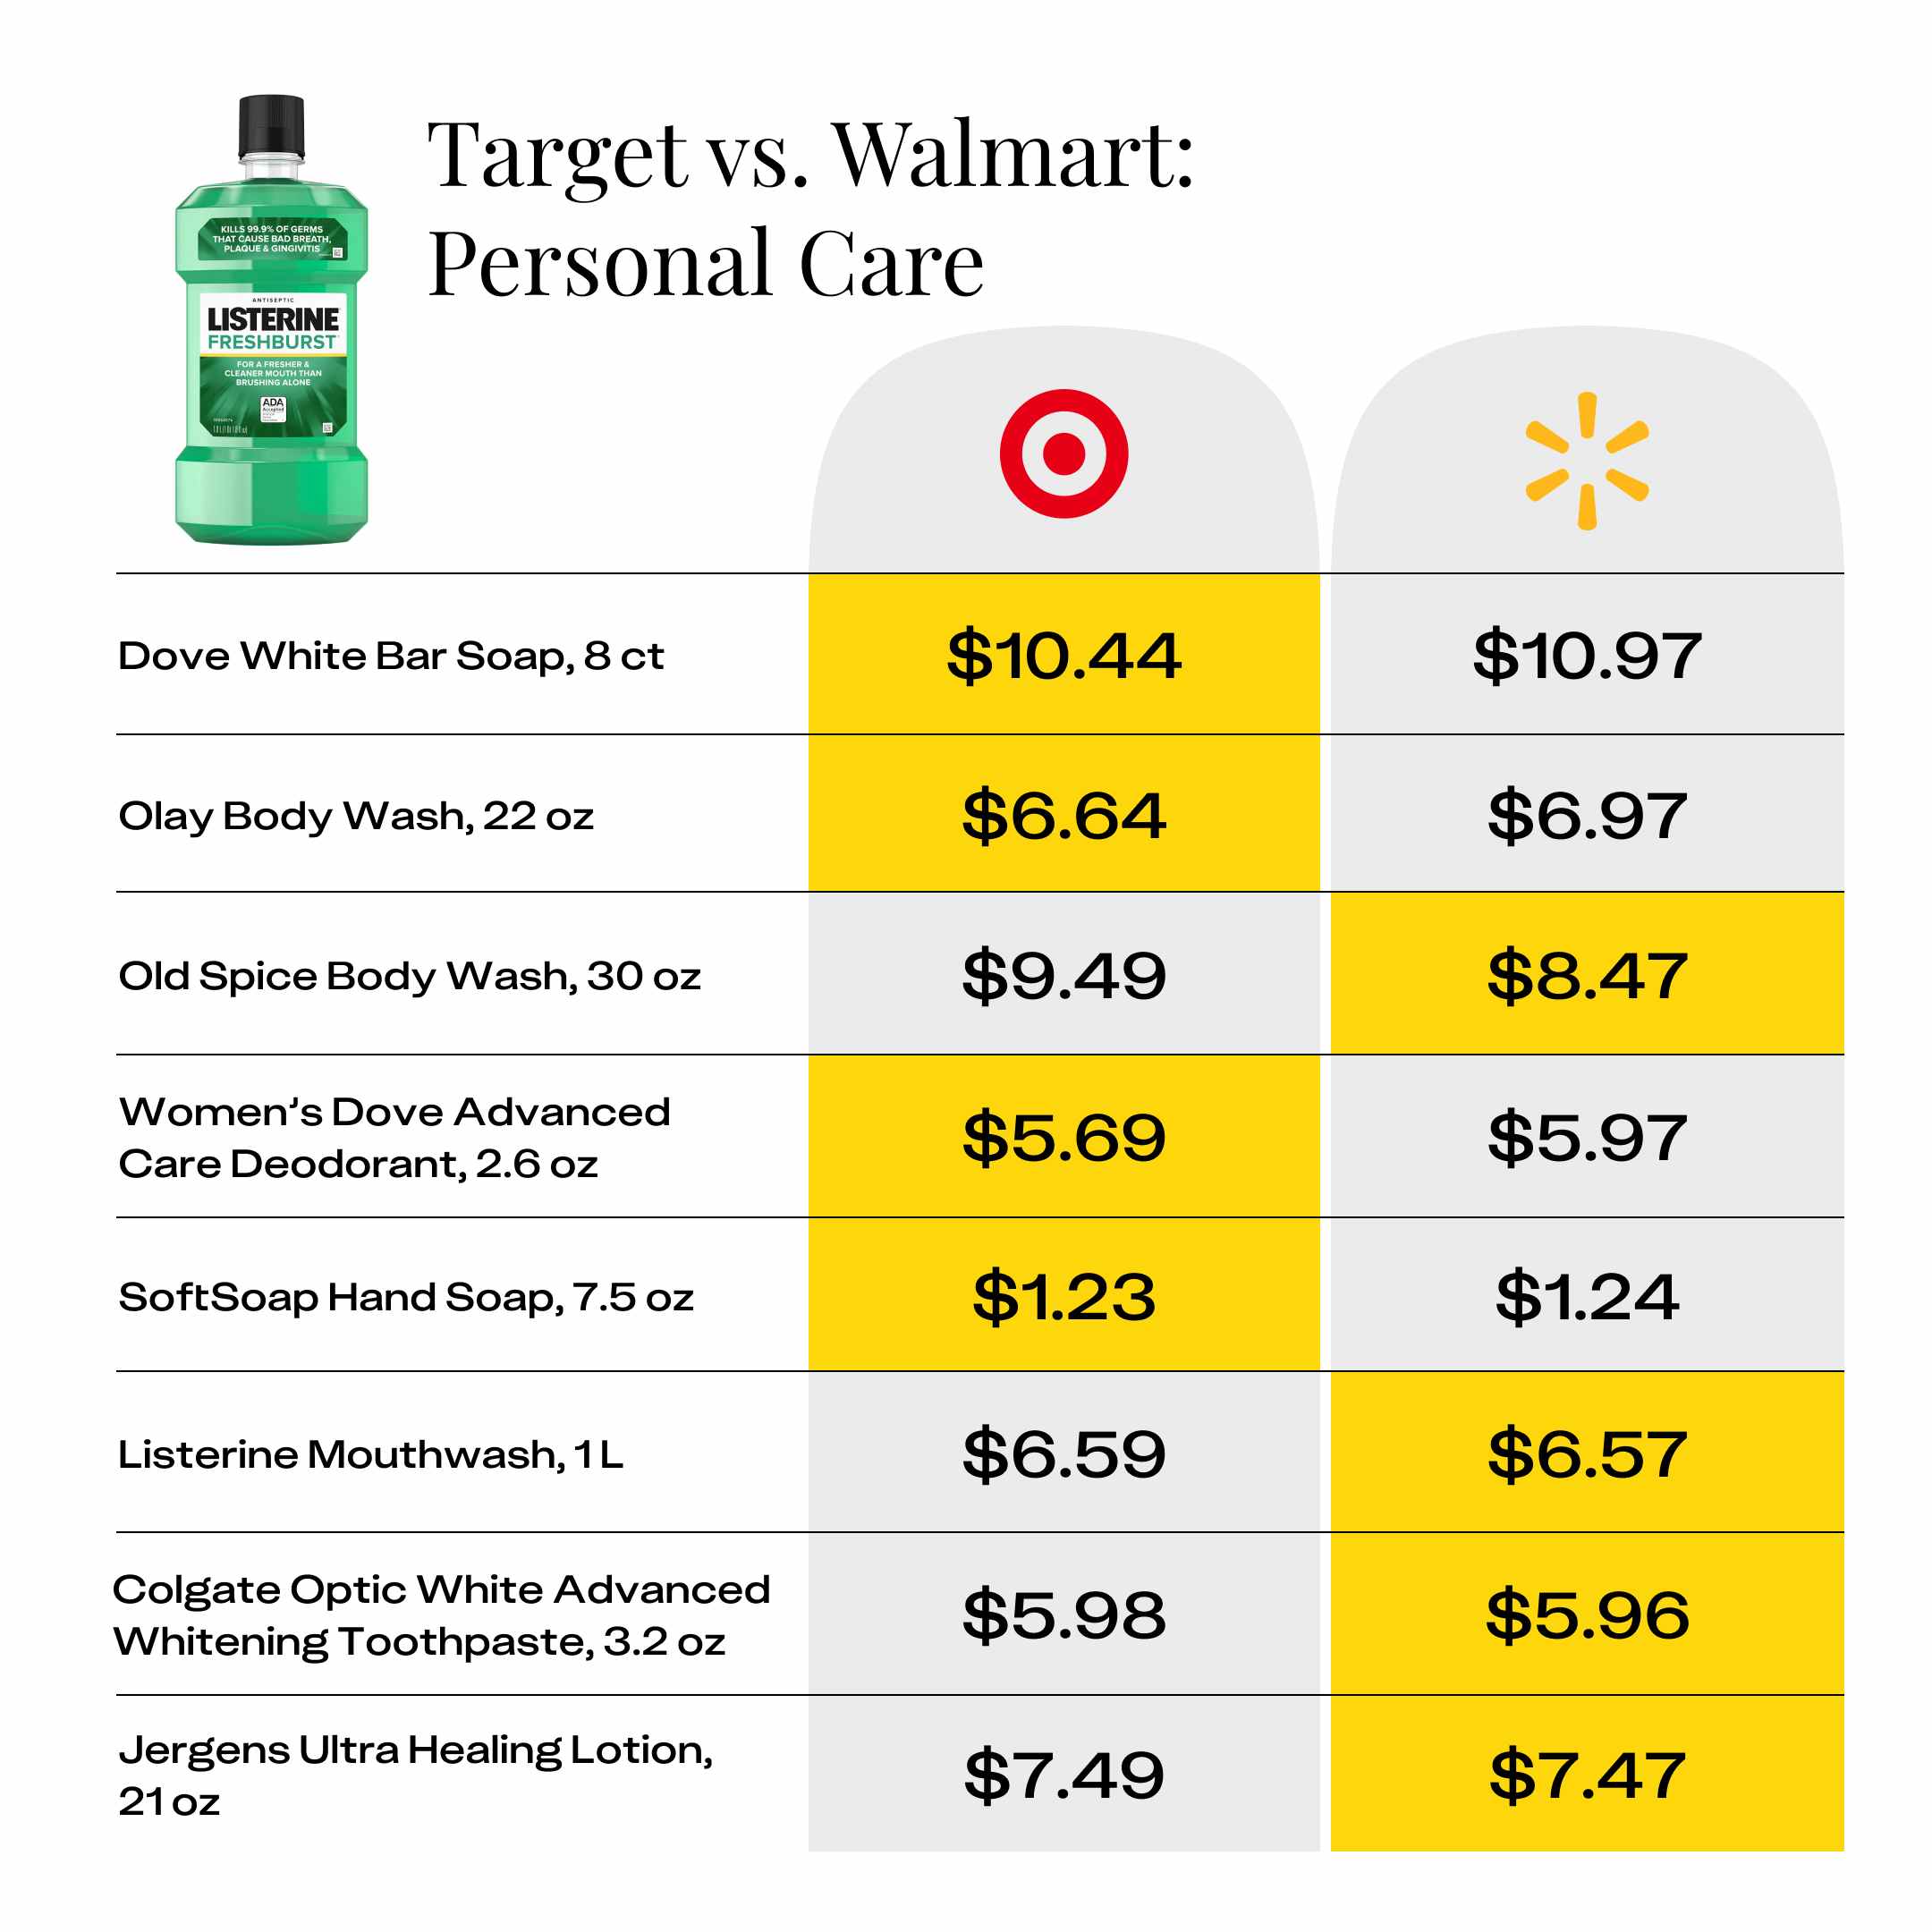 price comparison for personal care items at Target and Walmart